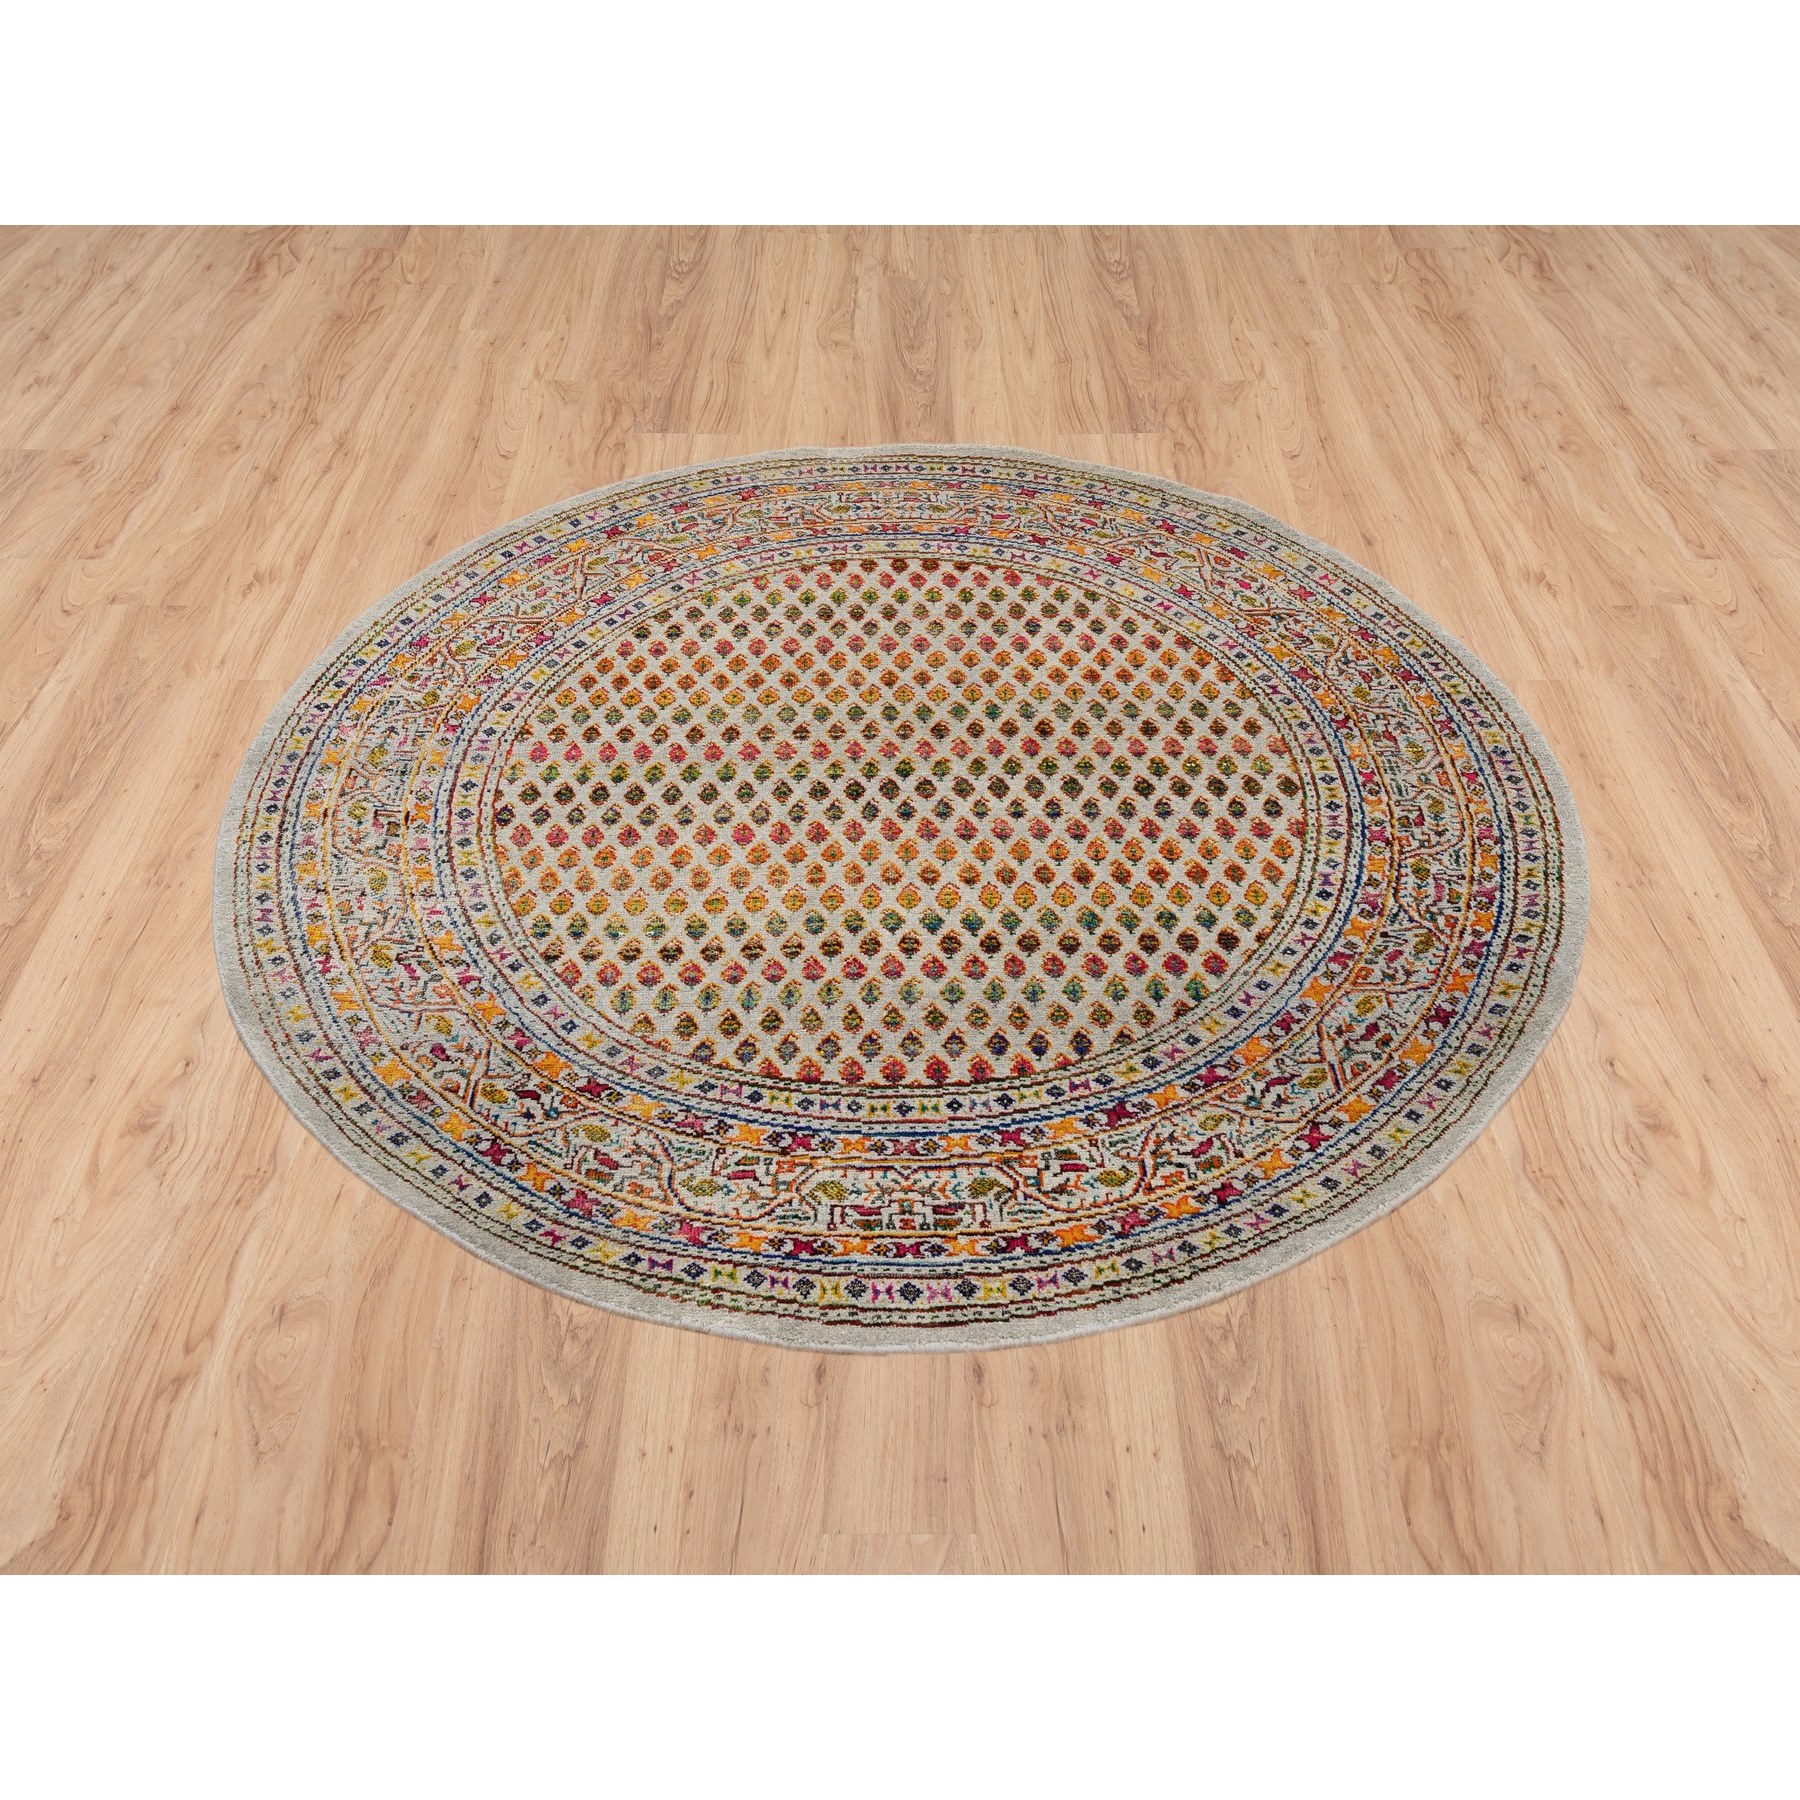 5'2"x5'2" Colorful Wool And Sari Silk Hand Woven Beige Sarouk Mir Inspired With Repetitive Boteh Design Oriental Round Rug 